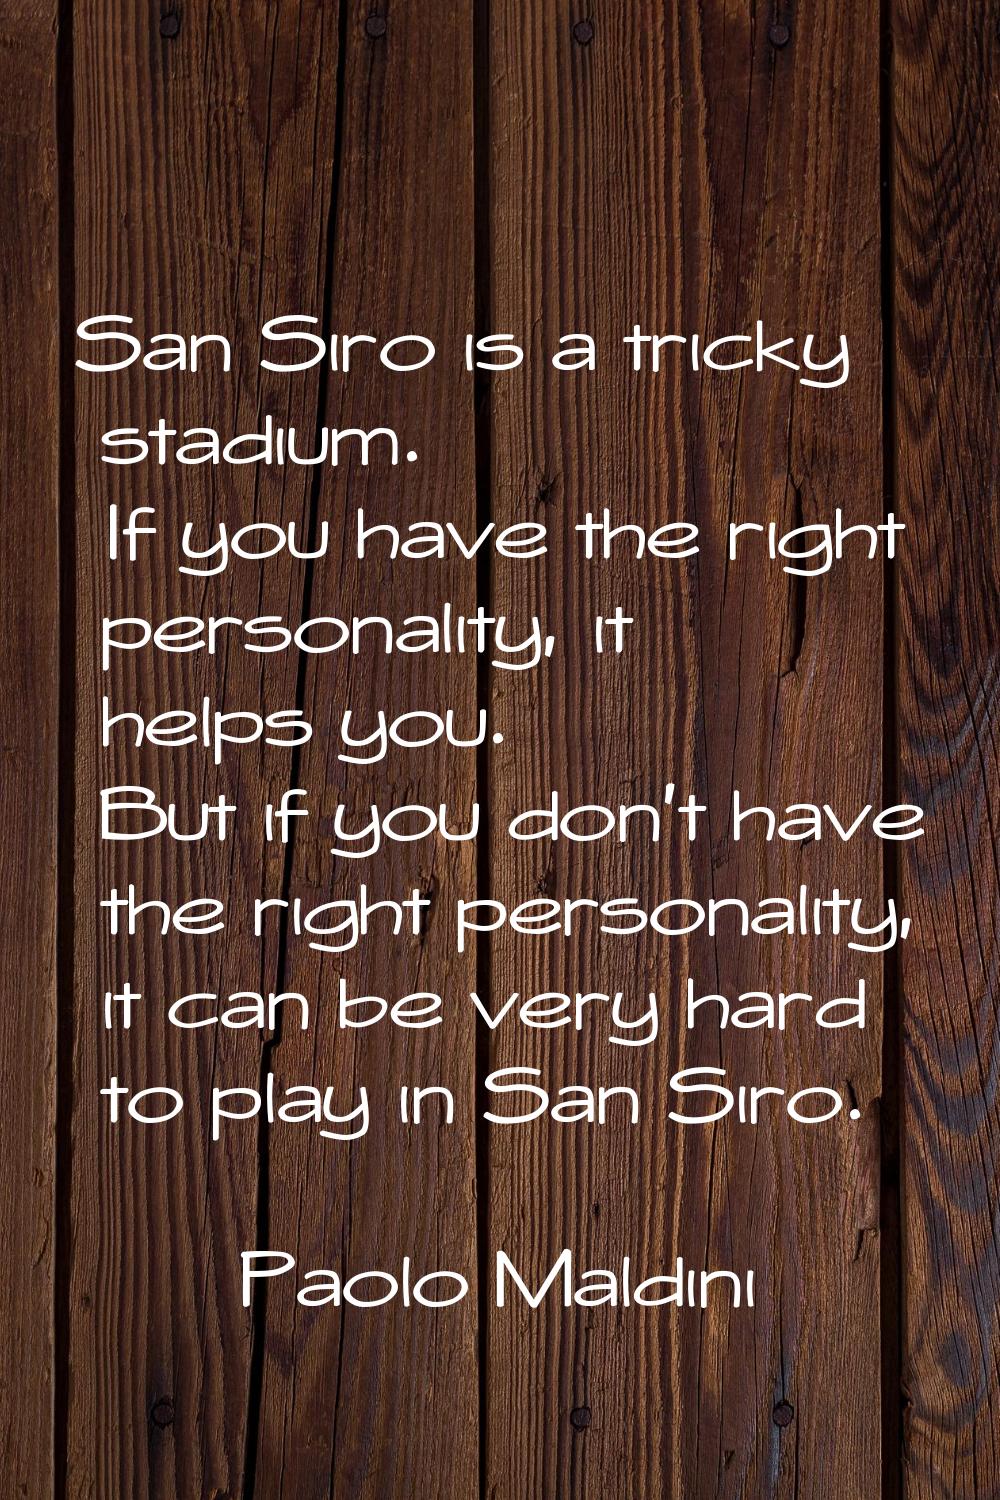 San Siro is a tricky stadium. If you have the right personality, it helps you. But if you don't hav